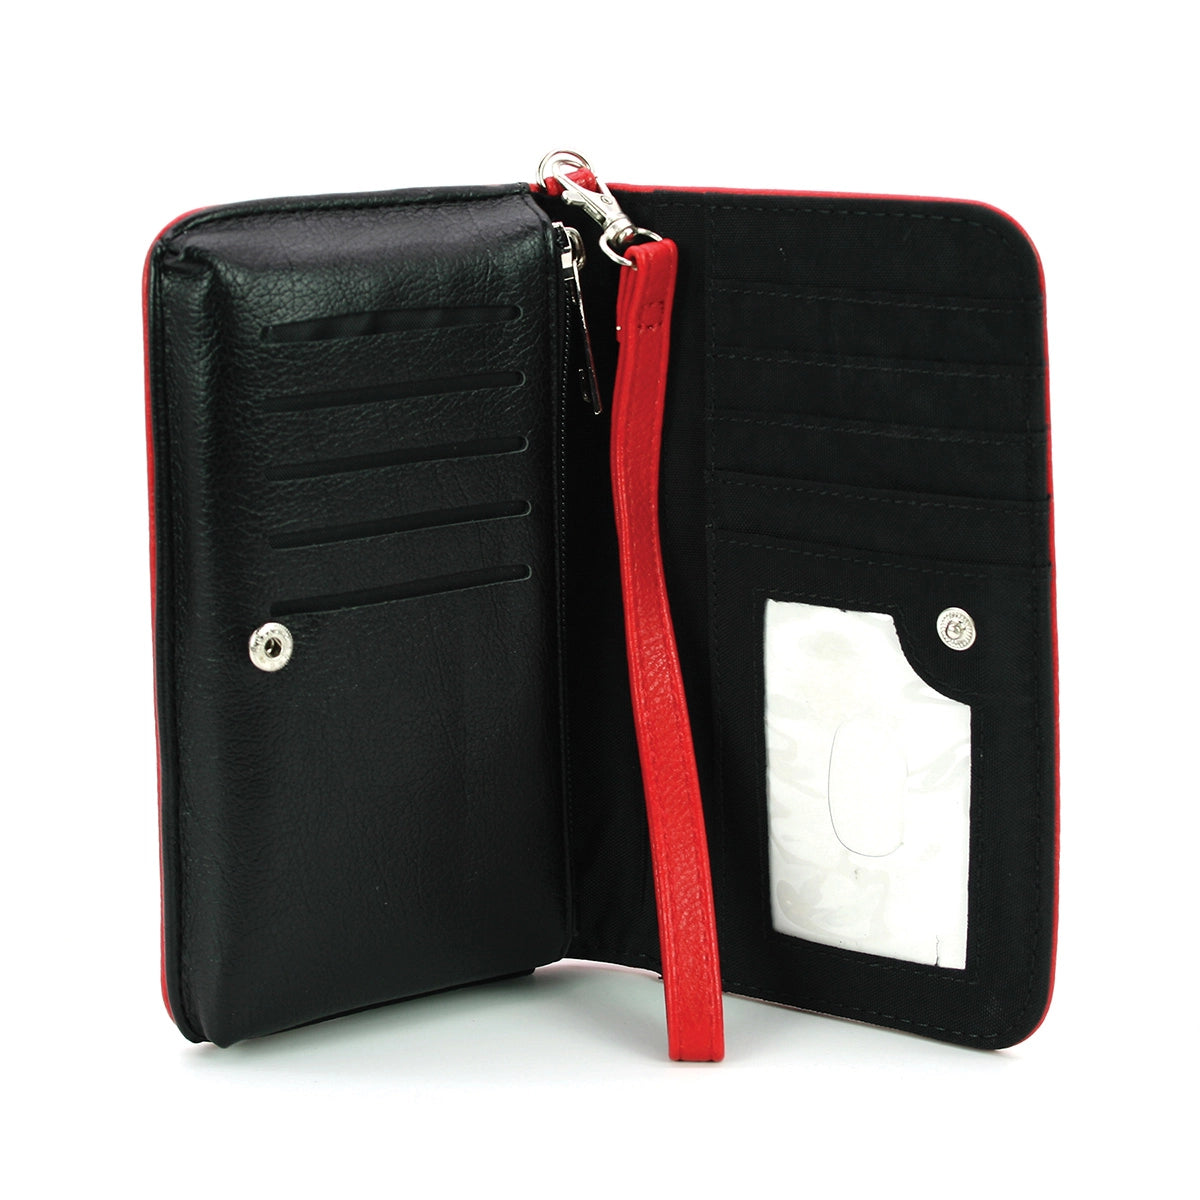 Dracula By: Bram Stoker Book Wallet With Wrist Strap